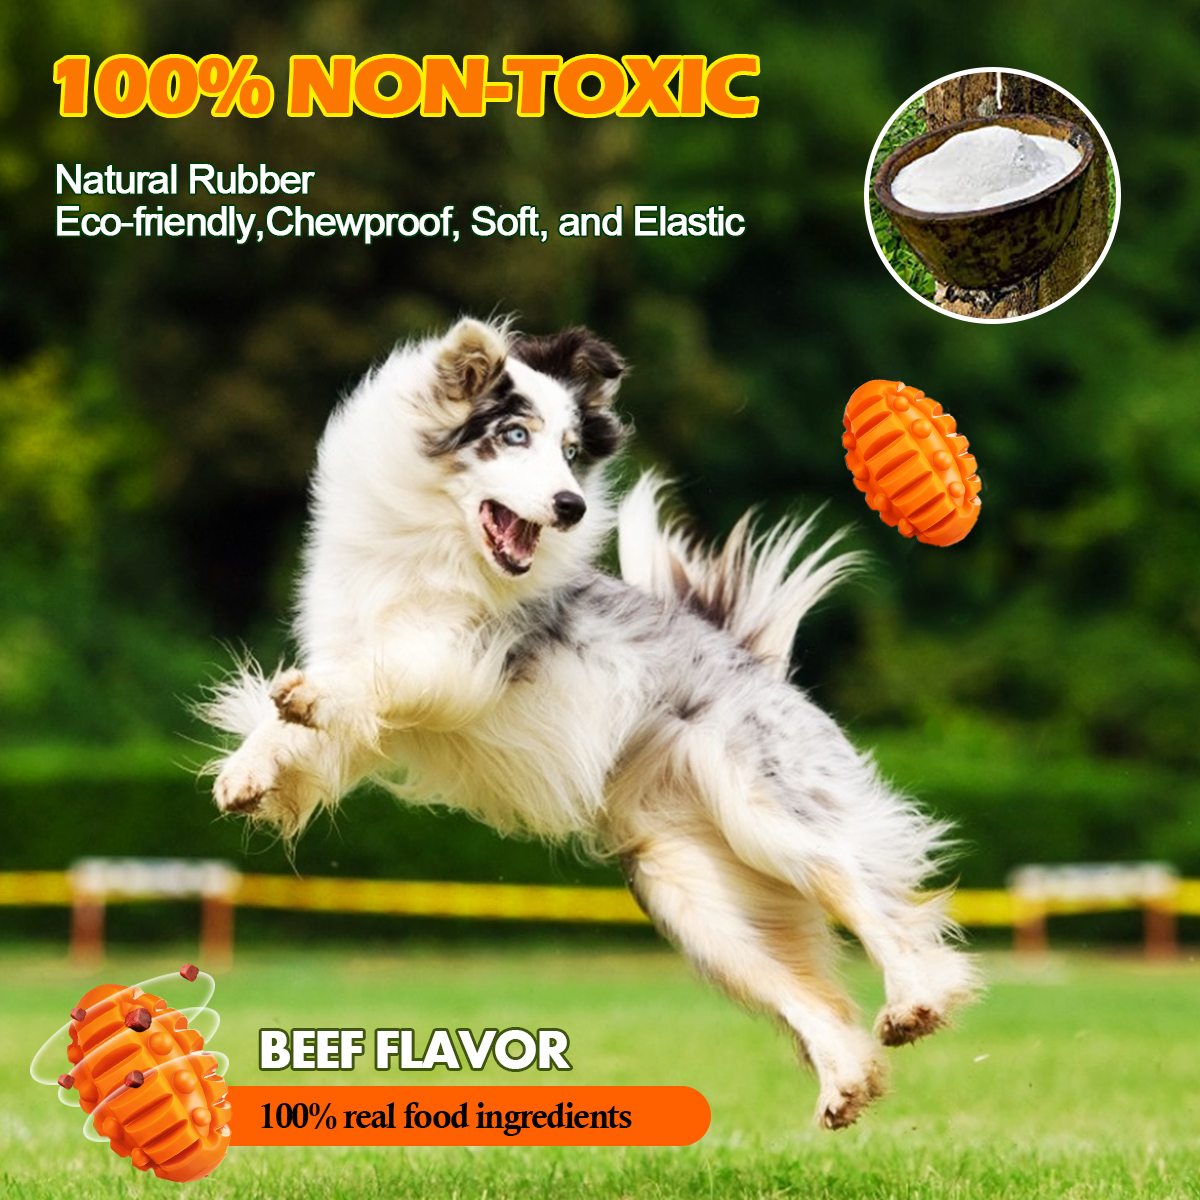 Focuspet-5quotx-3quot-Large-Interactive-Dog-Ball-Toys-Real-Beef-Flavor-Squeaky-Chew-Toy-for-Medium-L-1940481-3